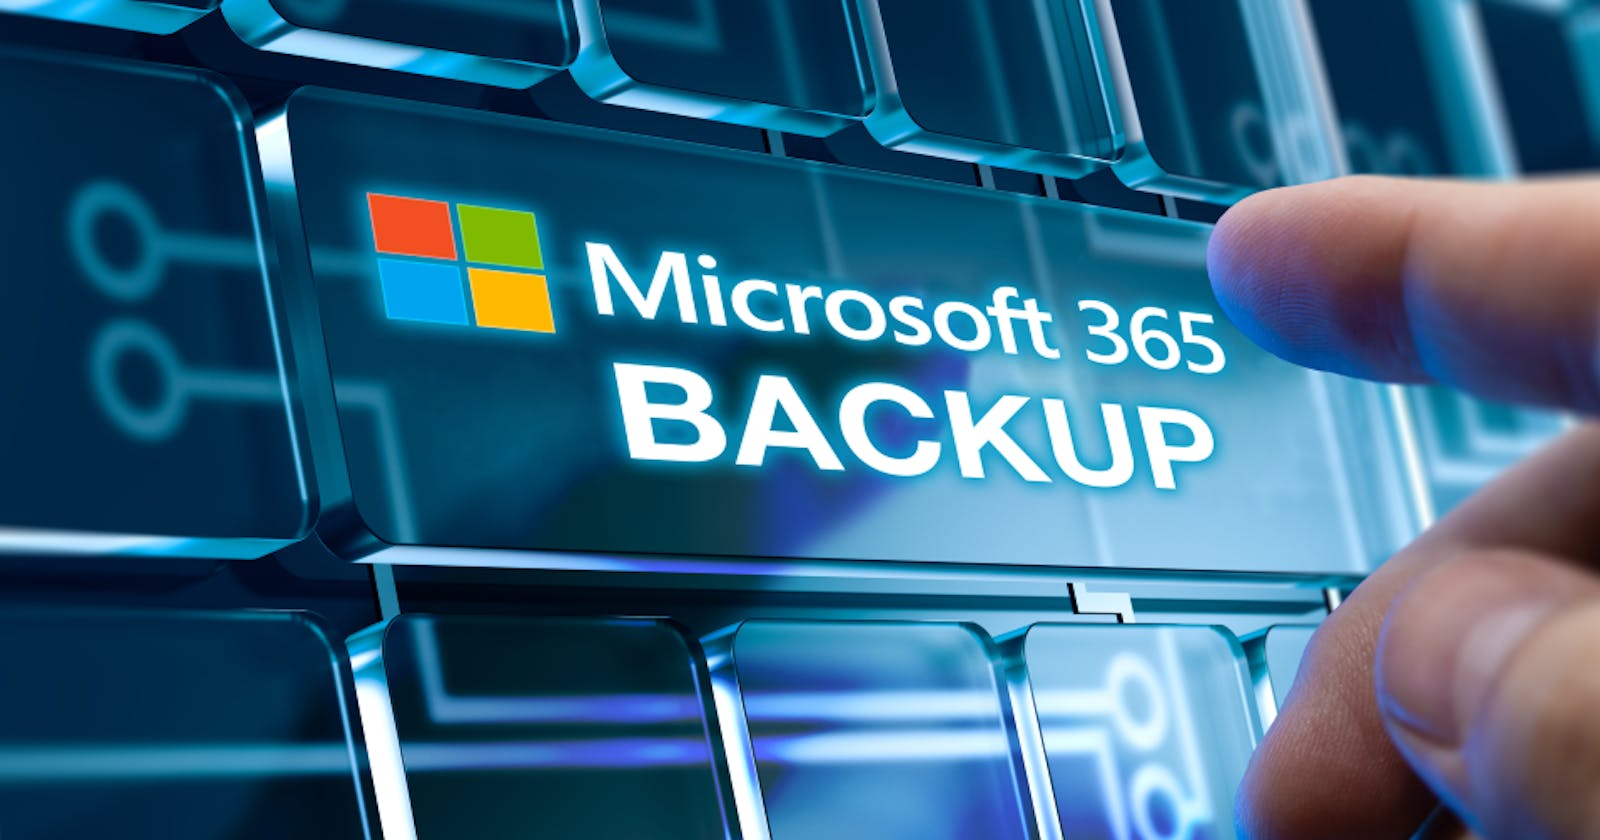 The Best Microsoft 365 Backup Solution: How to Choose